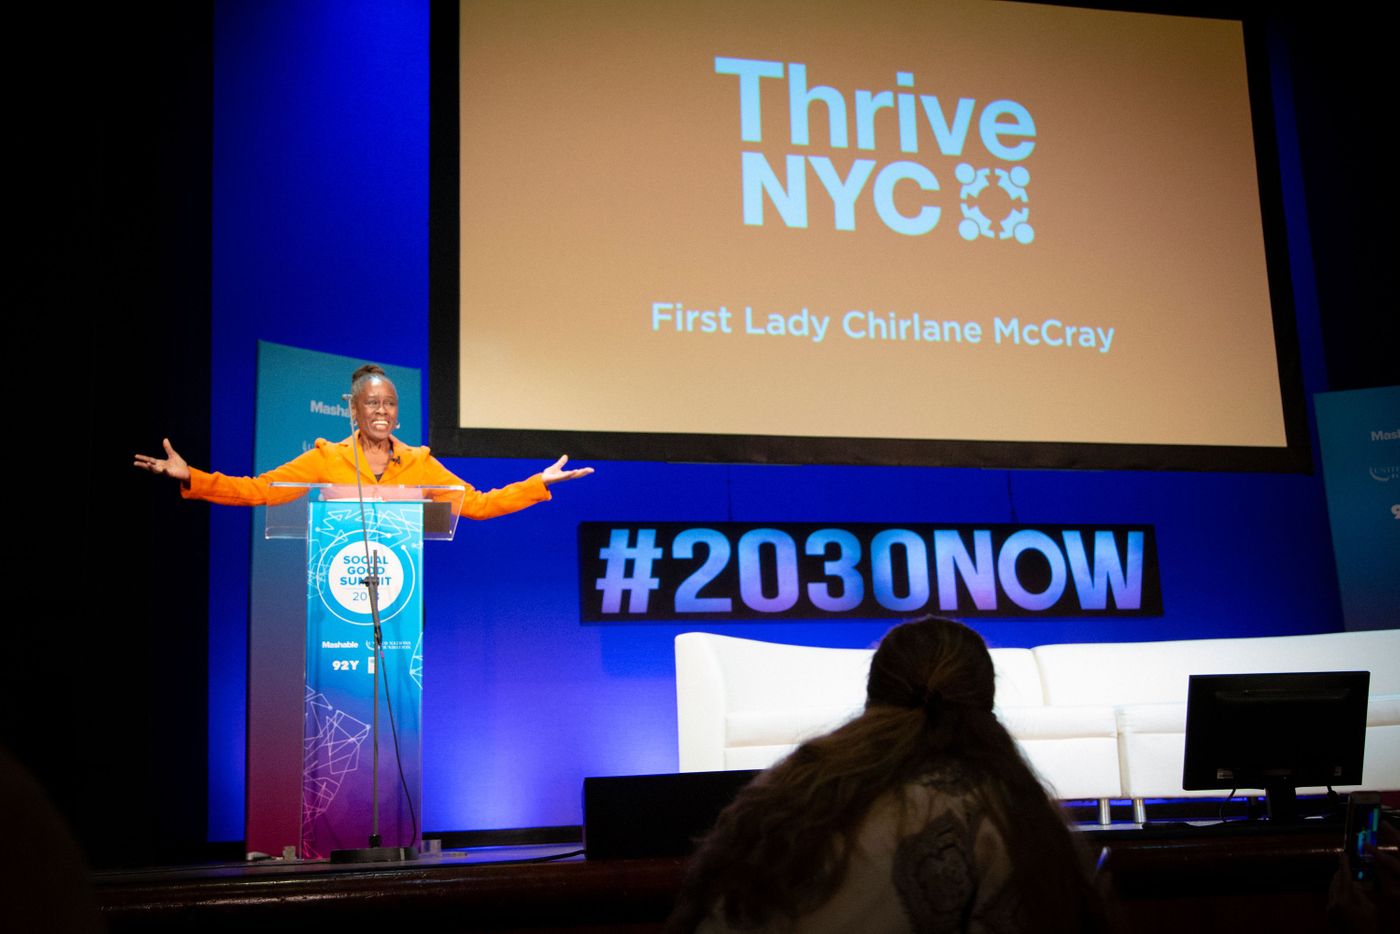 First Lady Chirlane McCray spoke about the ThriveNYC program at the 92nd Street Y in Manhattan in September 2018.